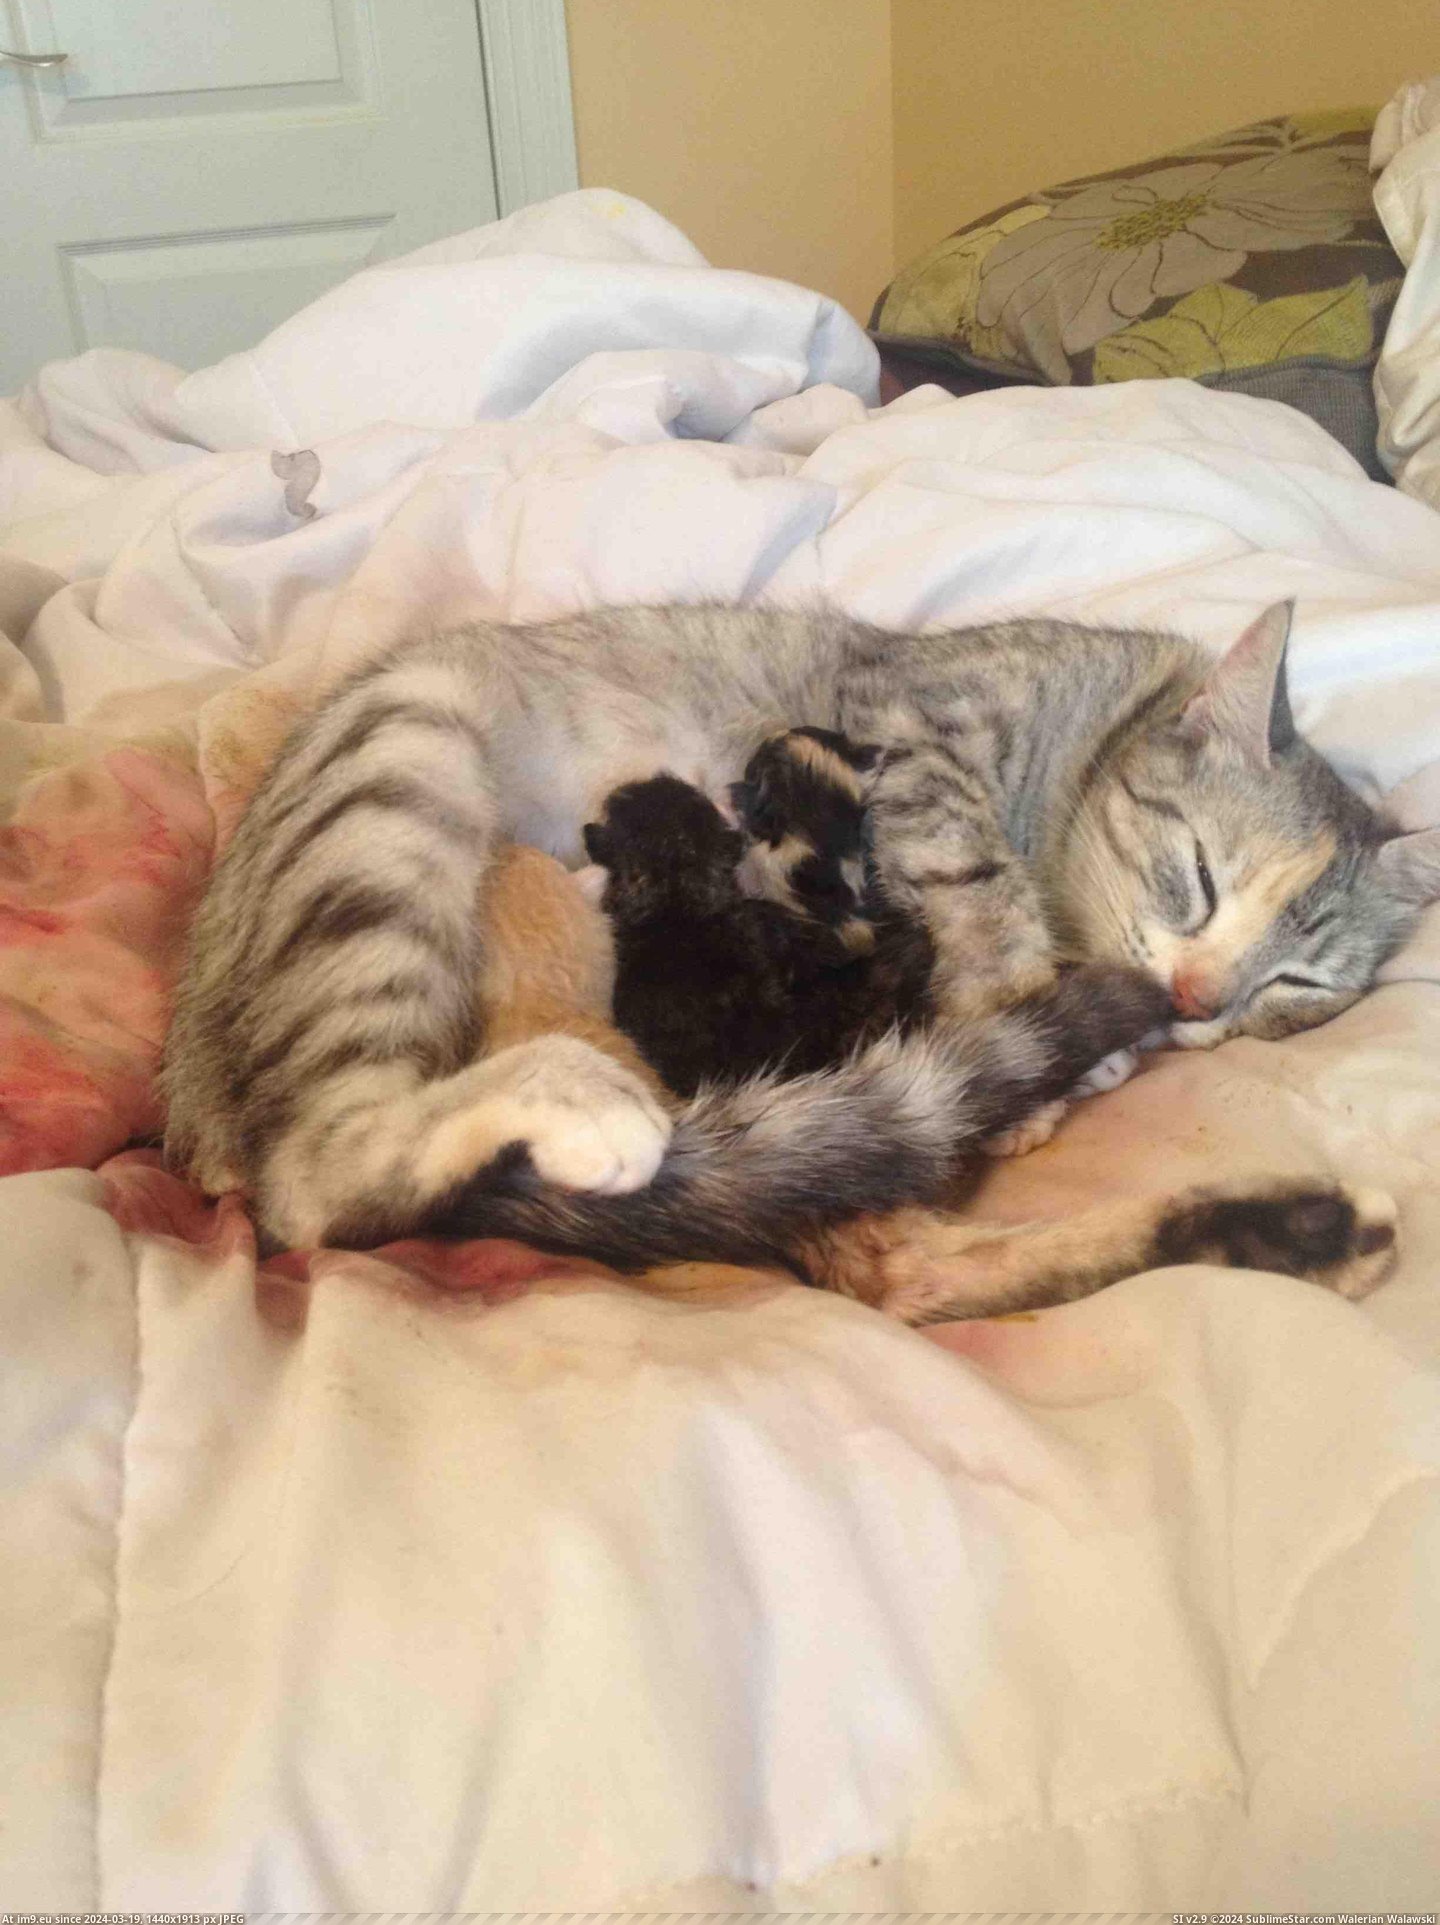 #You #Cat #Bed #She #Wake #Babies #Joking #Can #Had #Find #Guess [Aww] I've been joking that I will wake up and find my cat had her babies in bed with me. I'm sure you can guess where she had h Pic. (Bild von album My r/AWW favs))